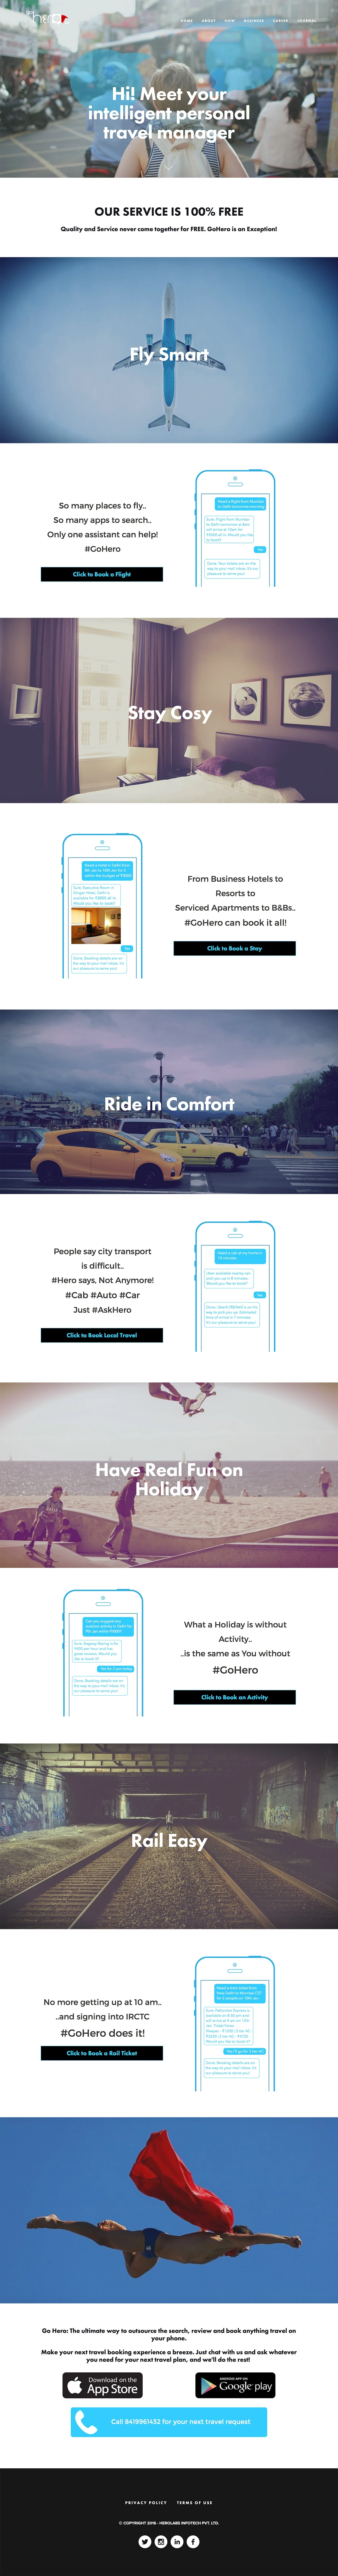 GoHero.ai Landing Page Example: Go Hero is a personal travel concierge app via chat available on iOS, Android